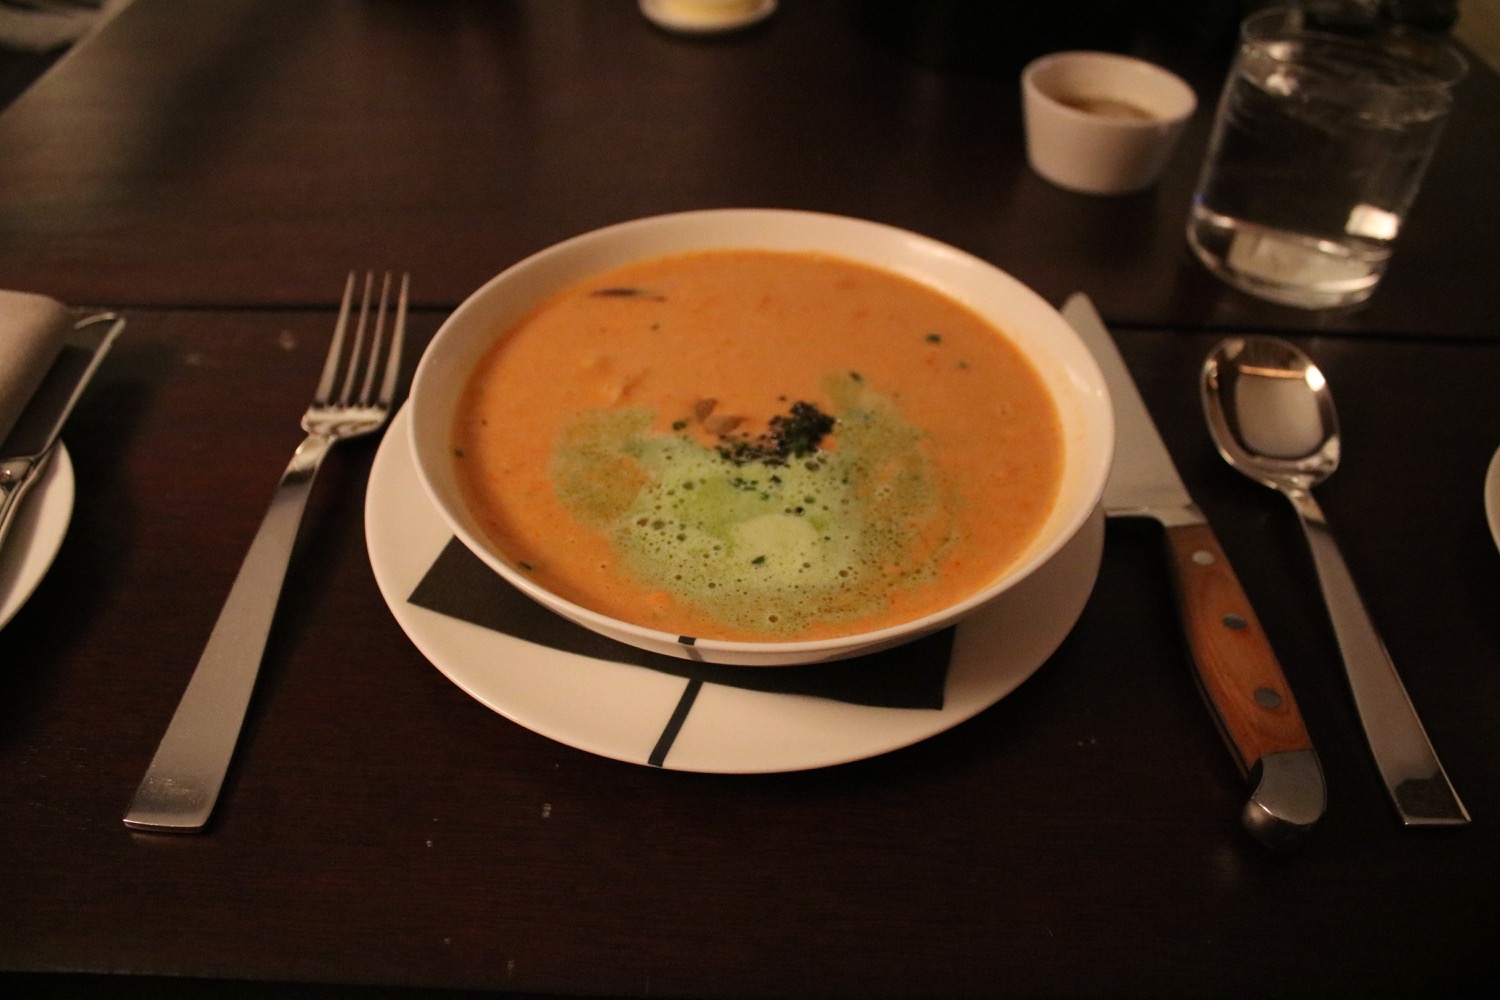 a bowl of soup on a plate with a fork and knife